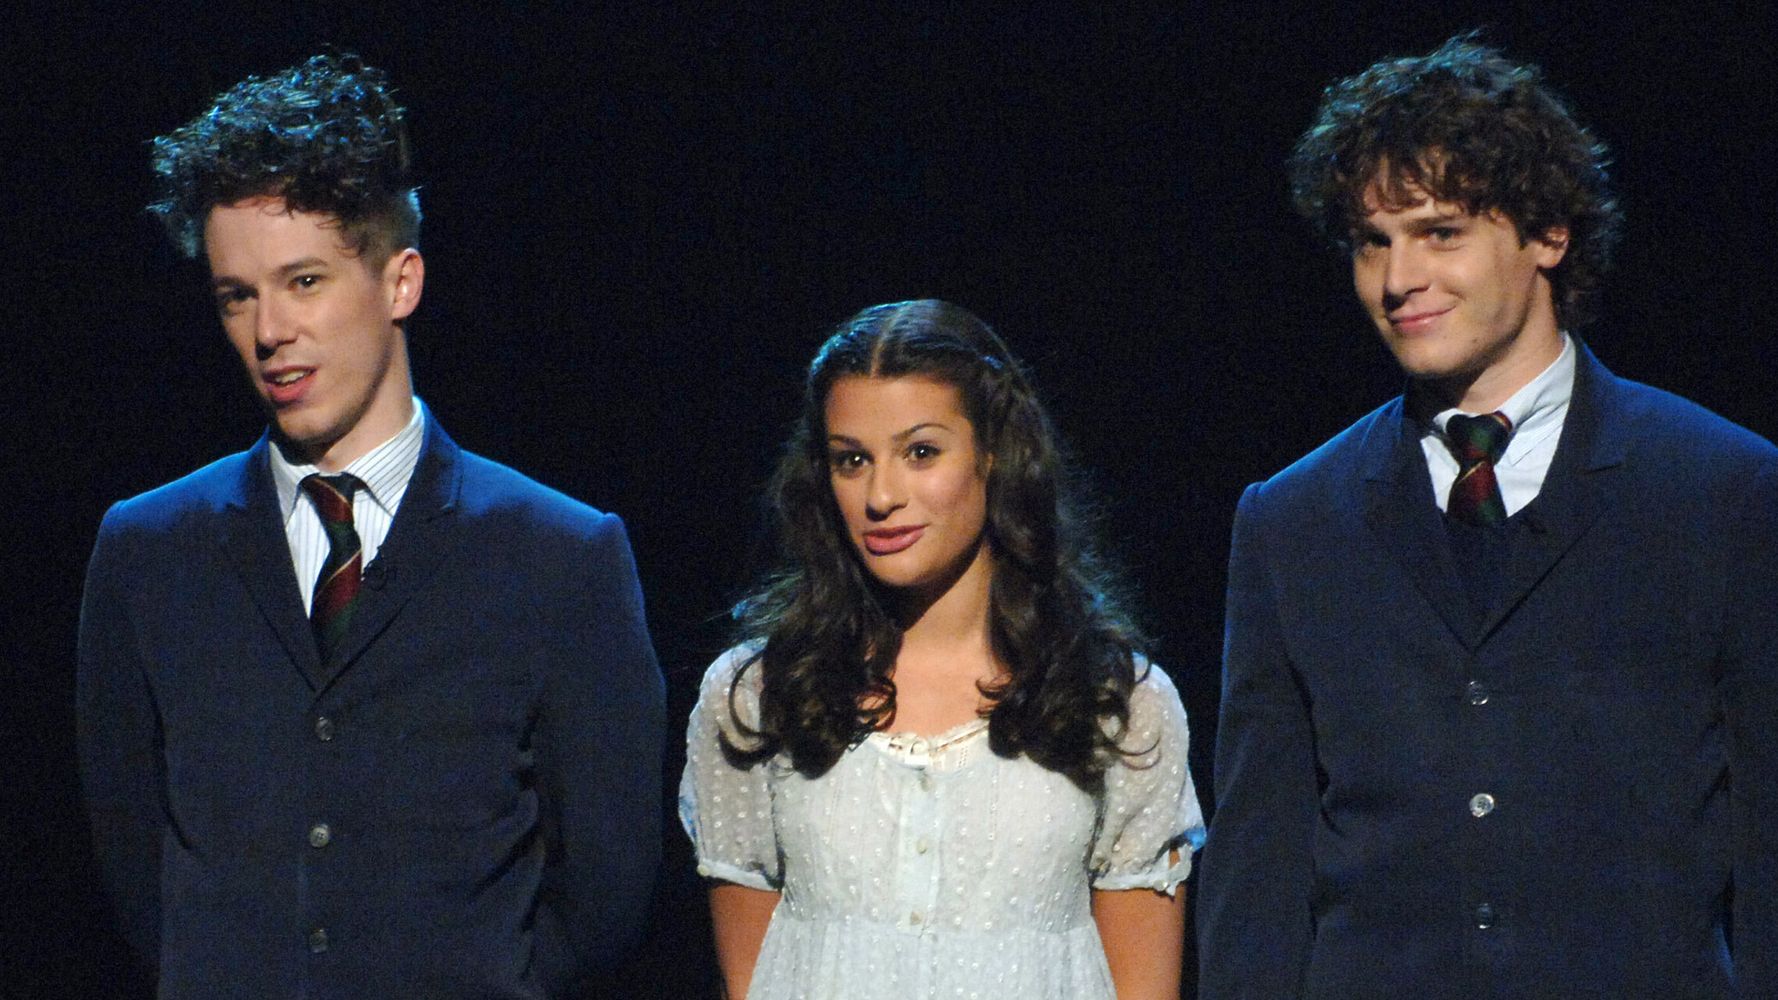 lea-michele-jonathan-groff-and-the-band-spring-awakening-will